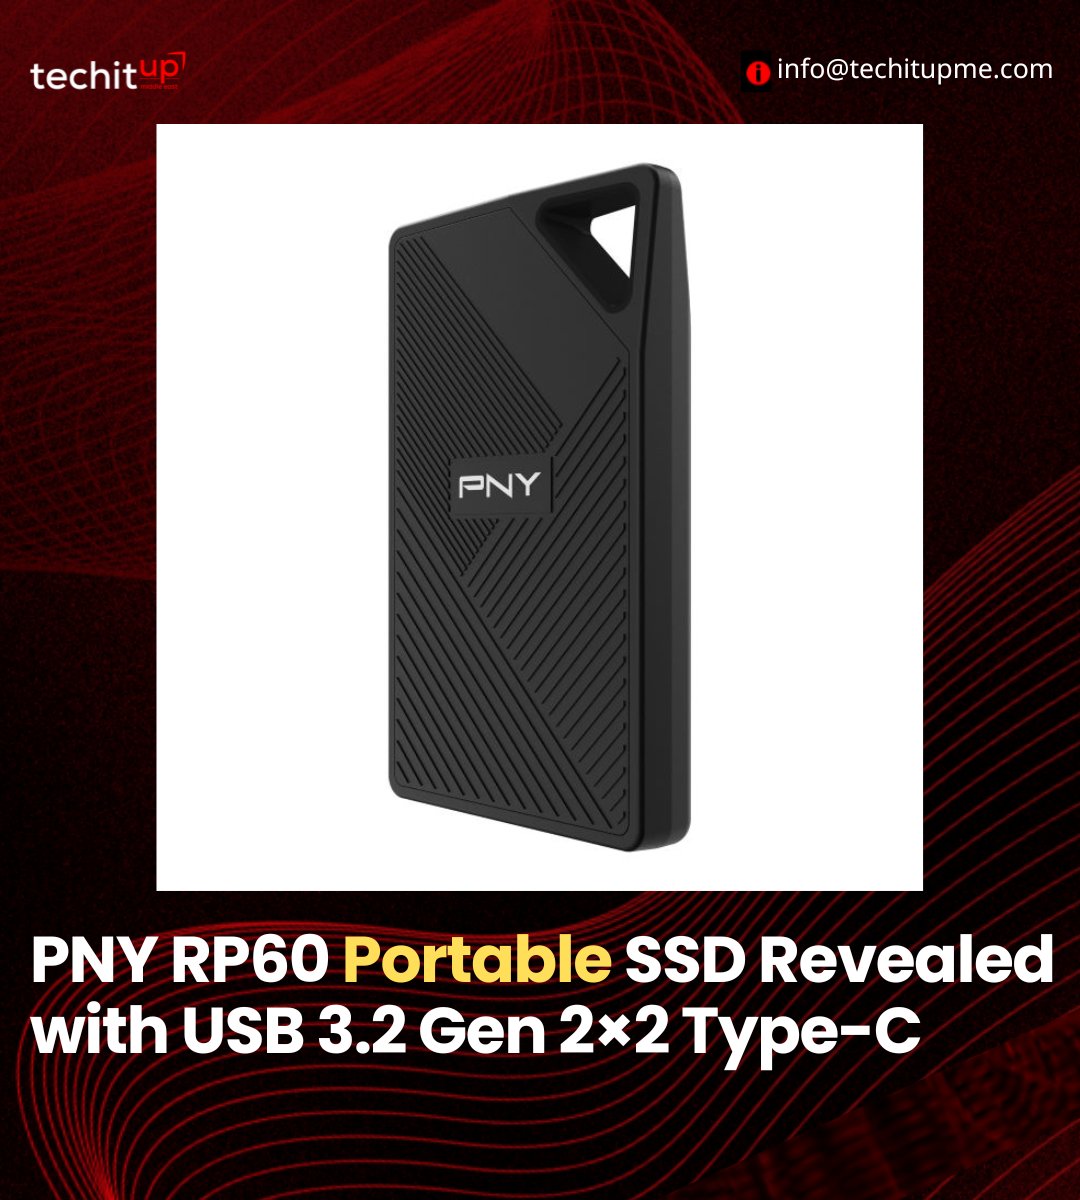 @PNYTechnologies just unveiled the RP60 Portable SSD! This ultra-tough drive boasts lightning-fast speeds (up to 2,000 MB/s!) and extreme durability - perfect for creators & gamers who need reliable storage on the move. Learn more: tinyurl.com/3w83pcks.